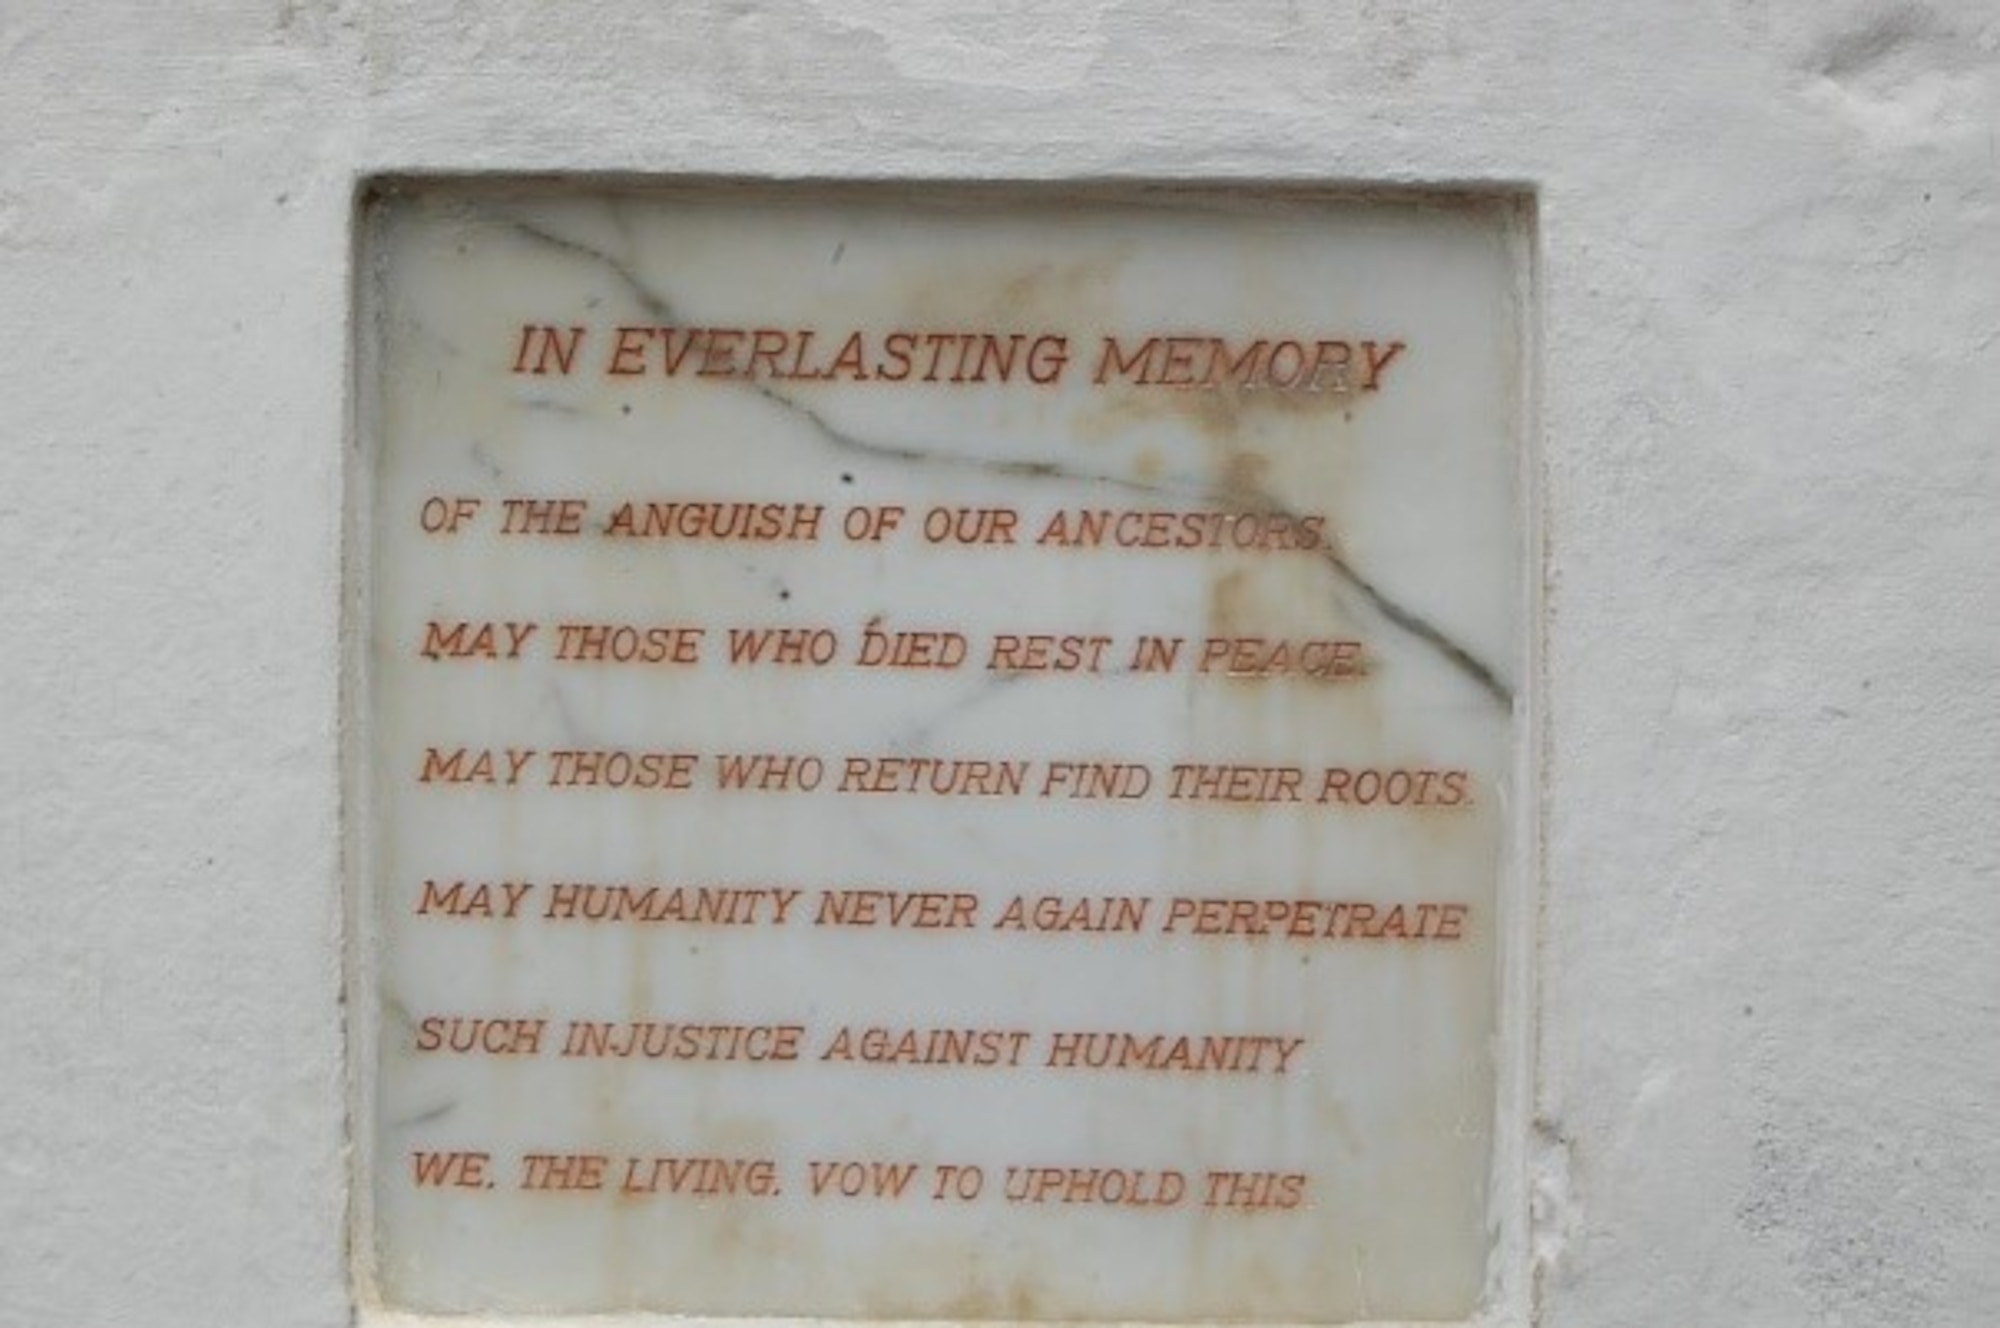 Ghana's pledge to never again perpetrate the injustice of slavery from their Coasts engraved at one of the Cape Coast castles that housed the slaves prior to their transatlantic trip. (Courtesy photo/Breanna McGowan)